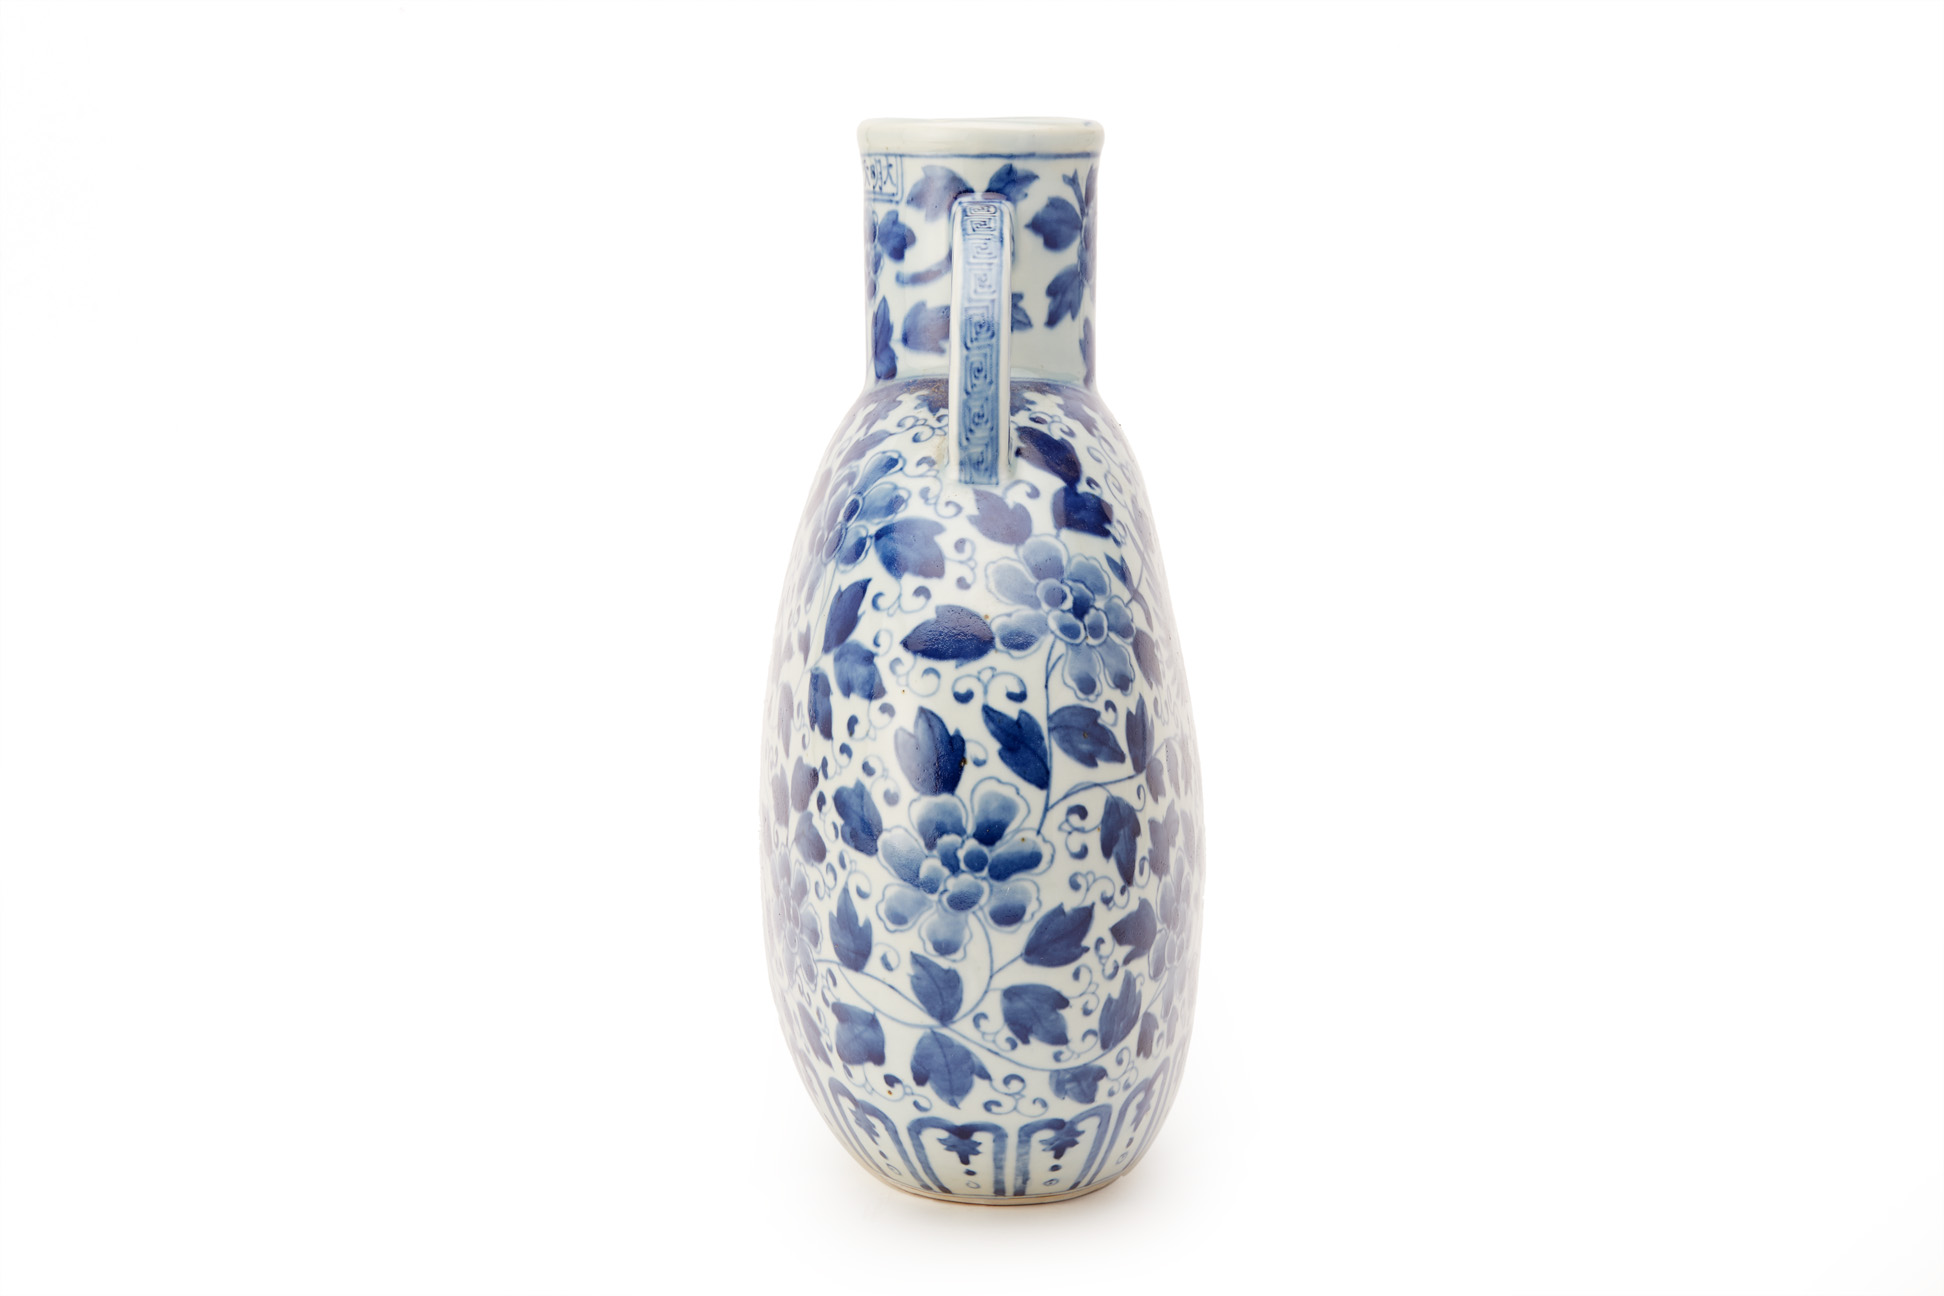 A MING STYLE BLUE AND WHITE PORCELAIN MOON FLASK - Image 2 of 4